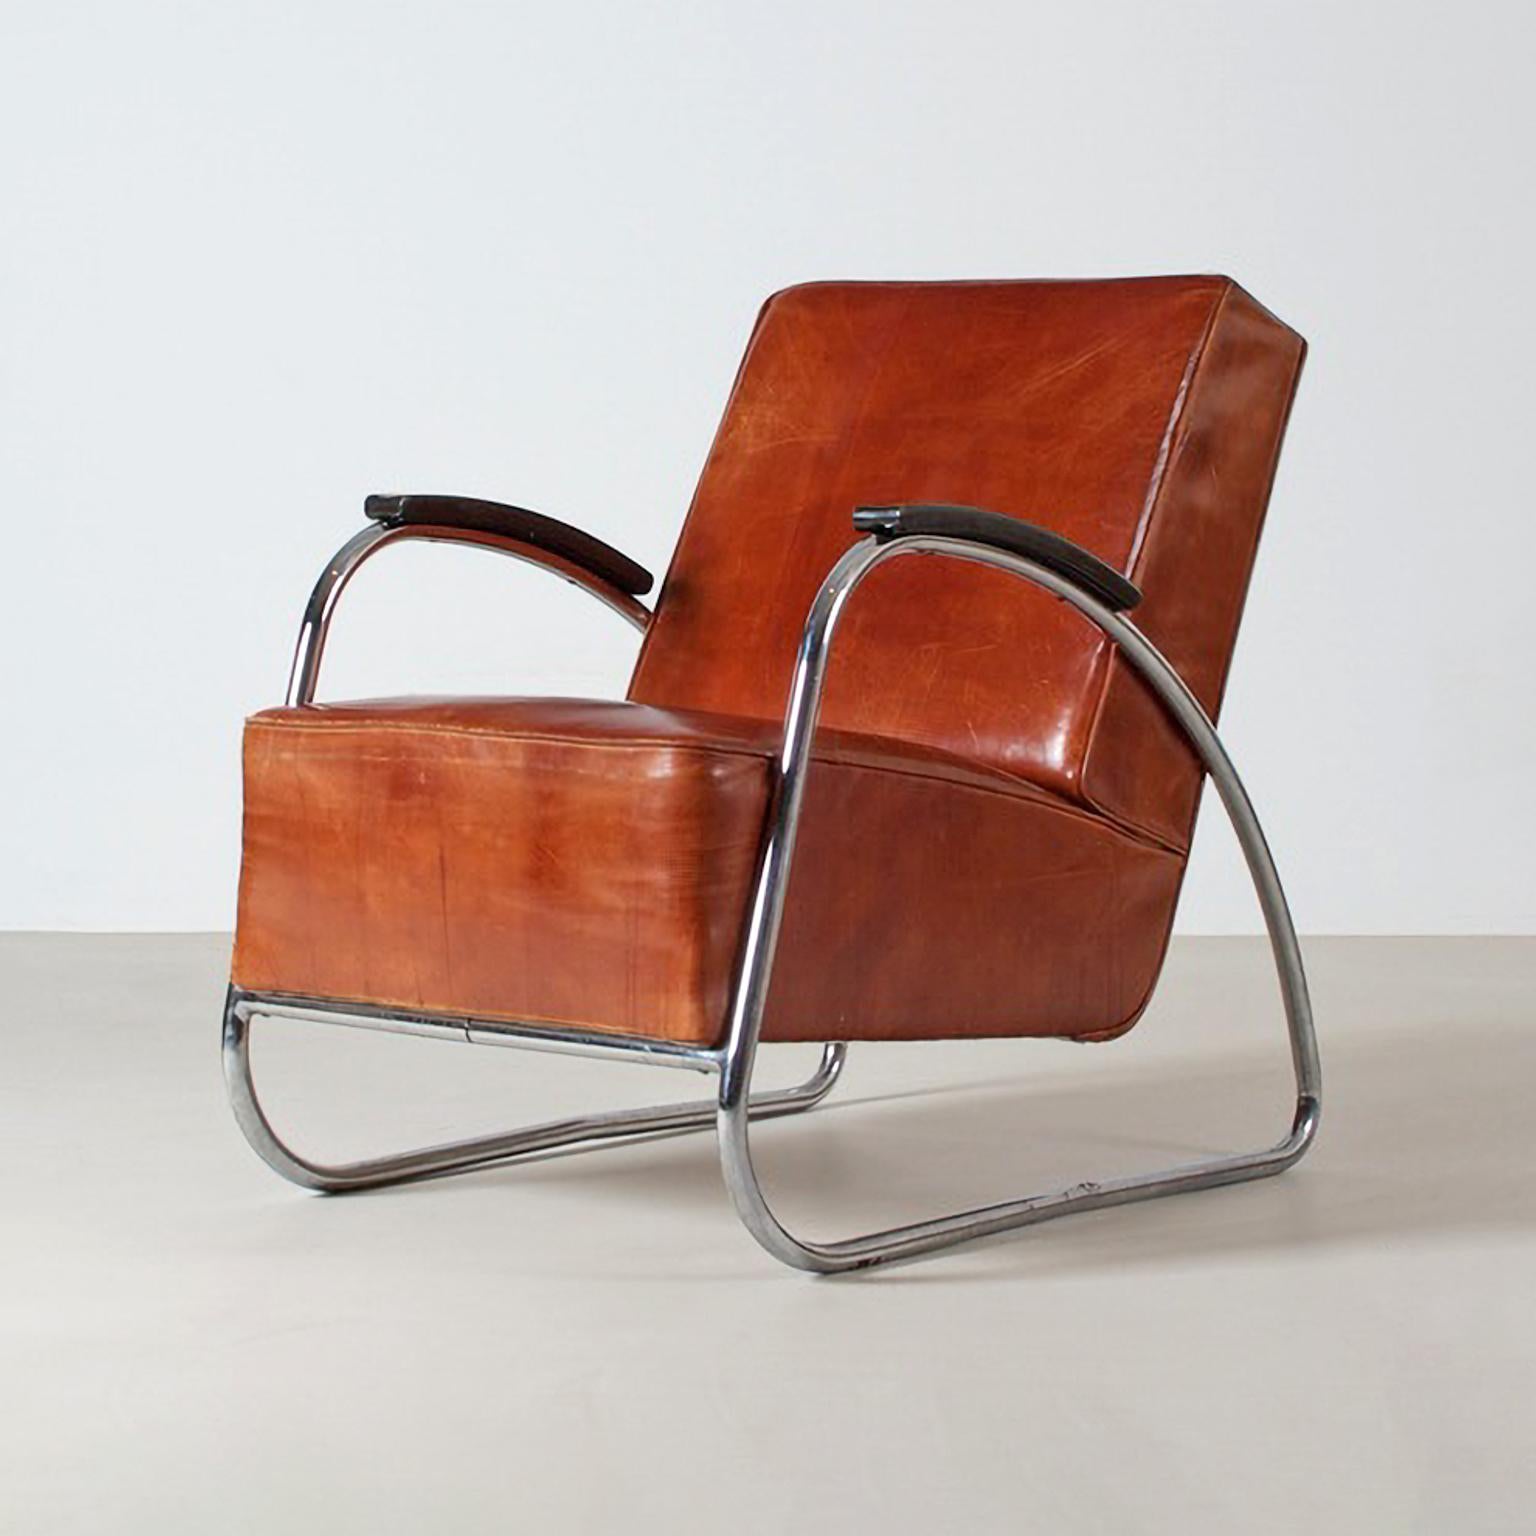 Customizable club chair by Mauser Werke, Waldeck, Germany, c. 1939.
Chrome plated tubular steel, leather upholstery and lacquered wood.

Delivery time c. 8-10 weeks.